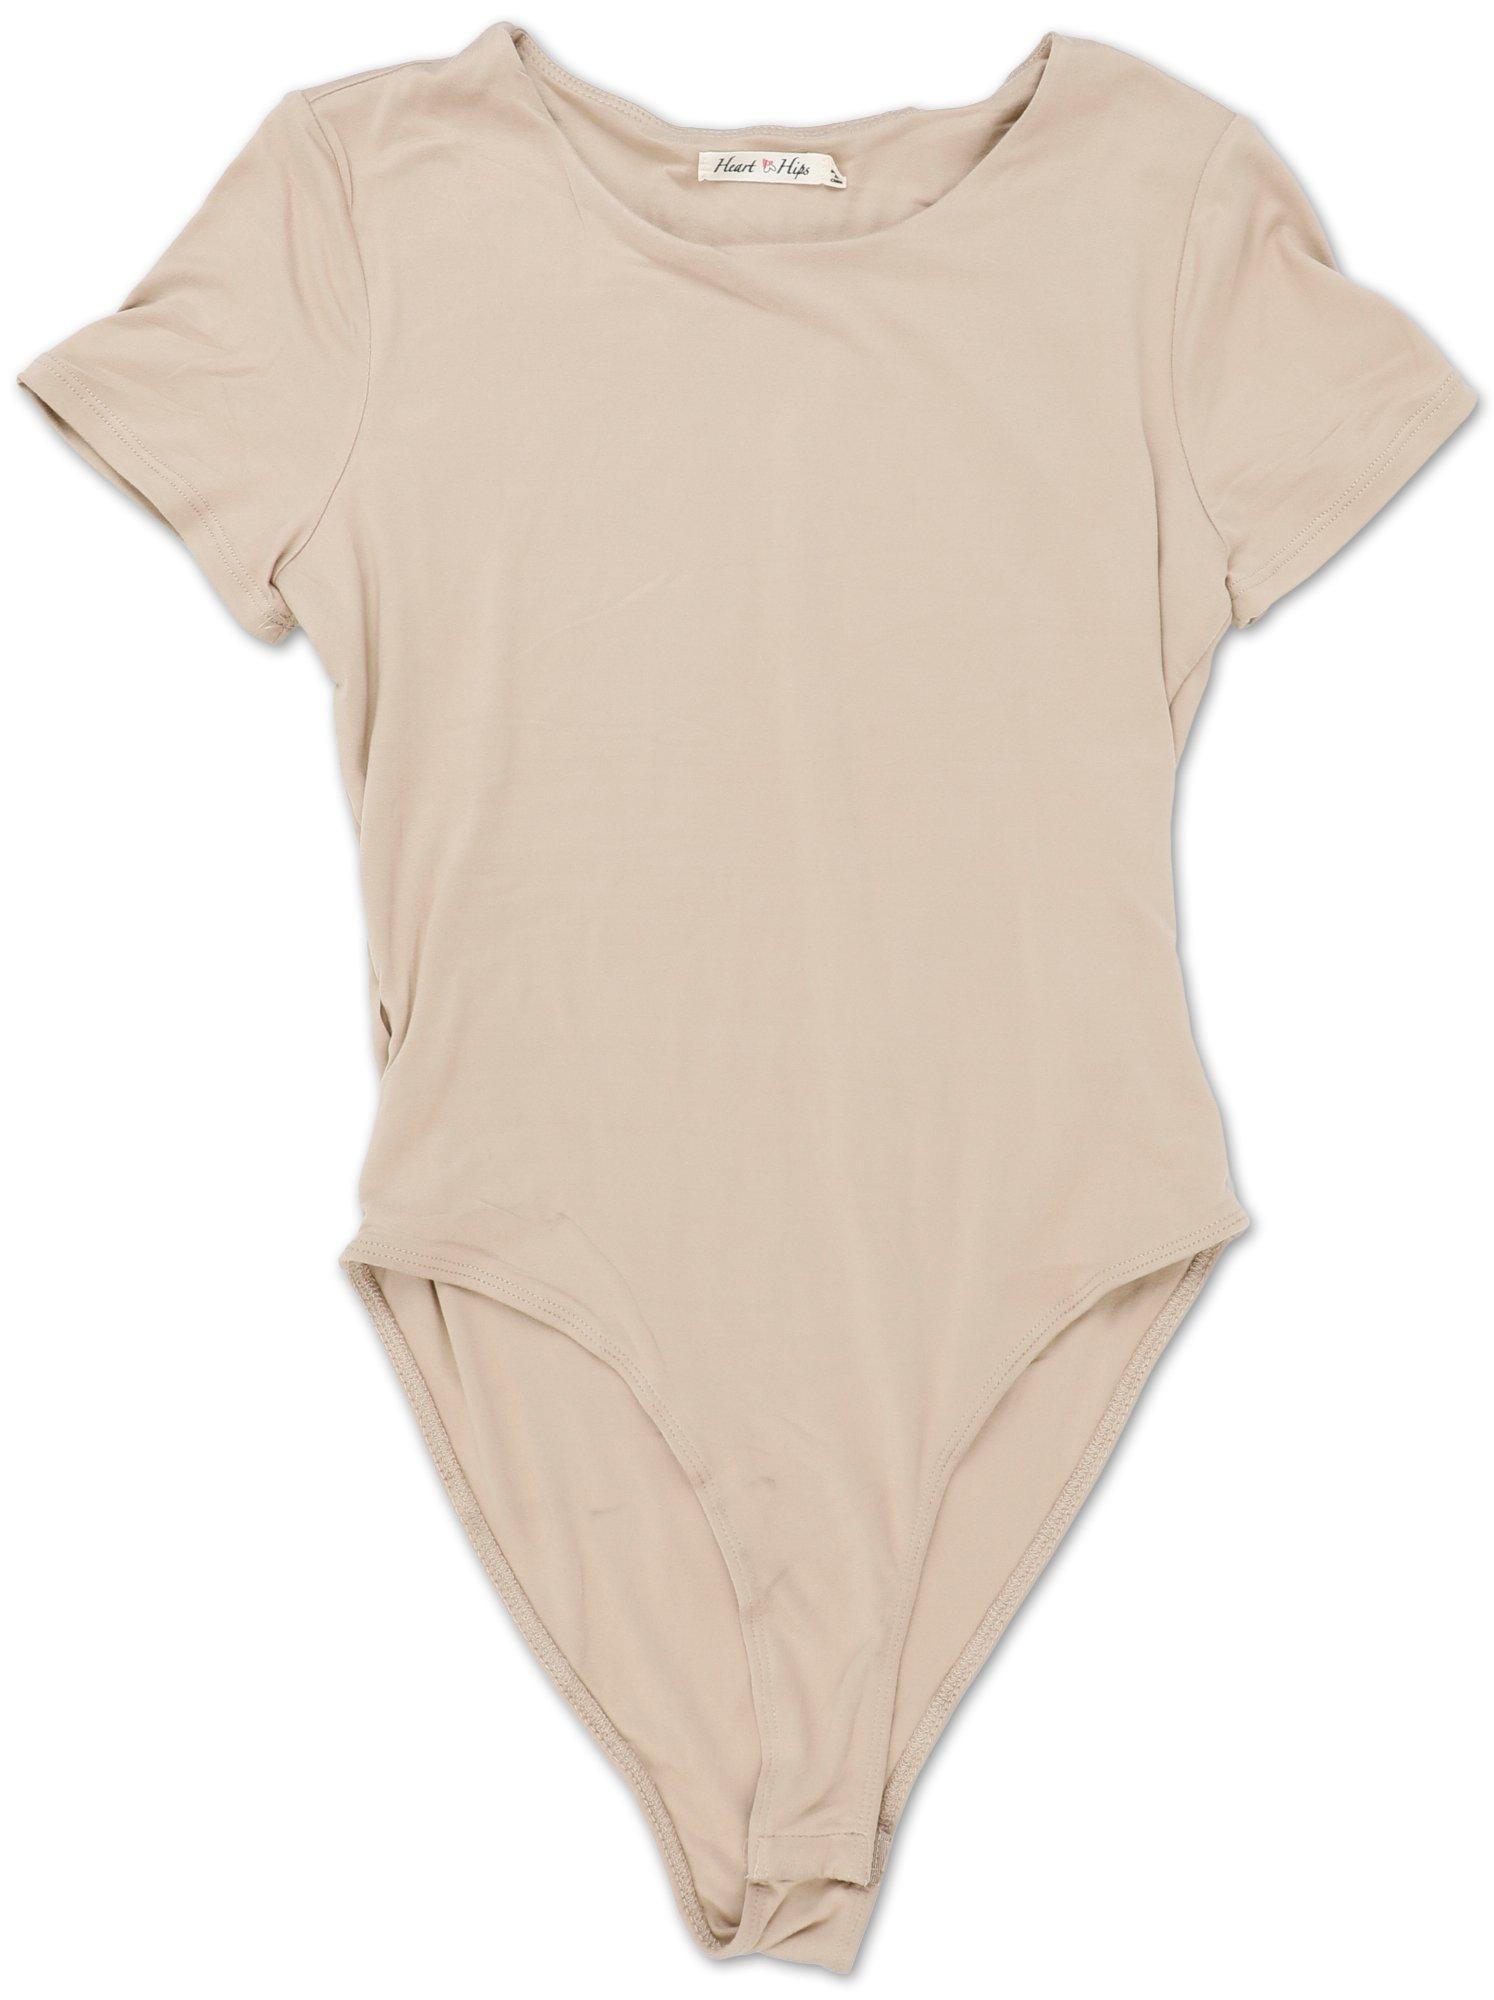 Juniors Ribbed Bodysuit with Long Sleeves - Set of 3